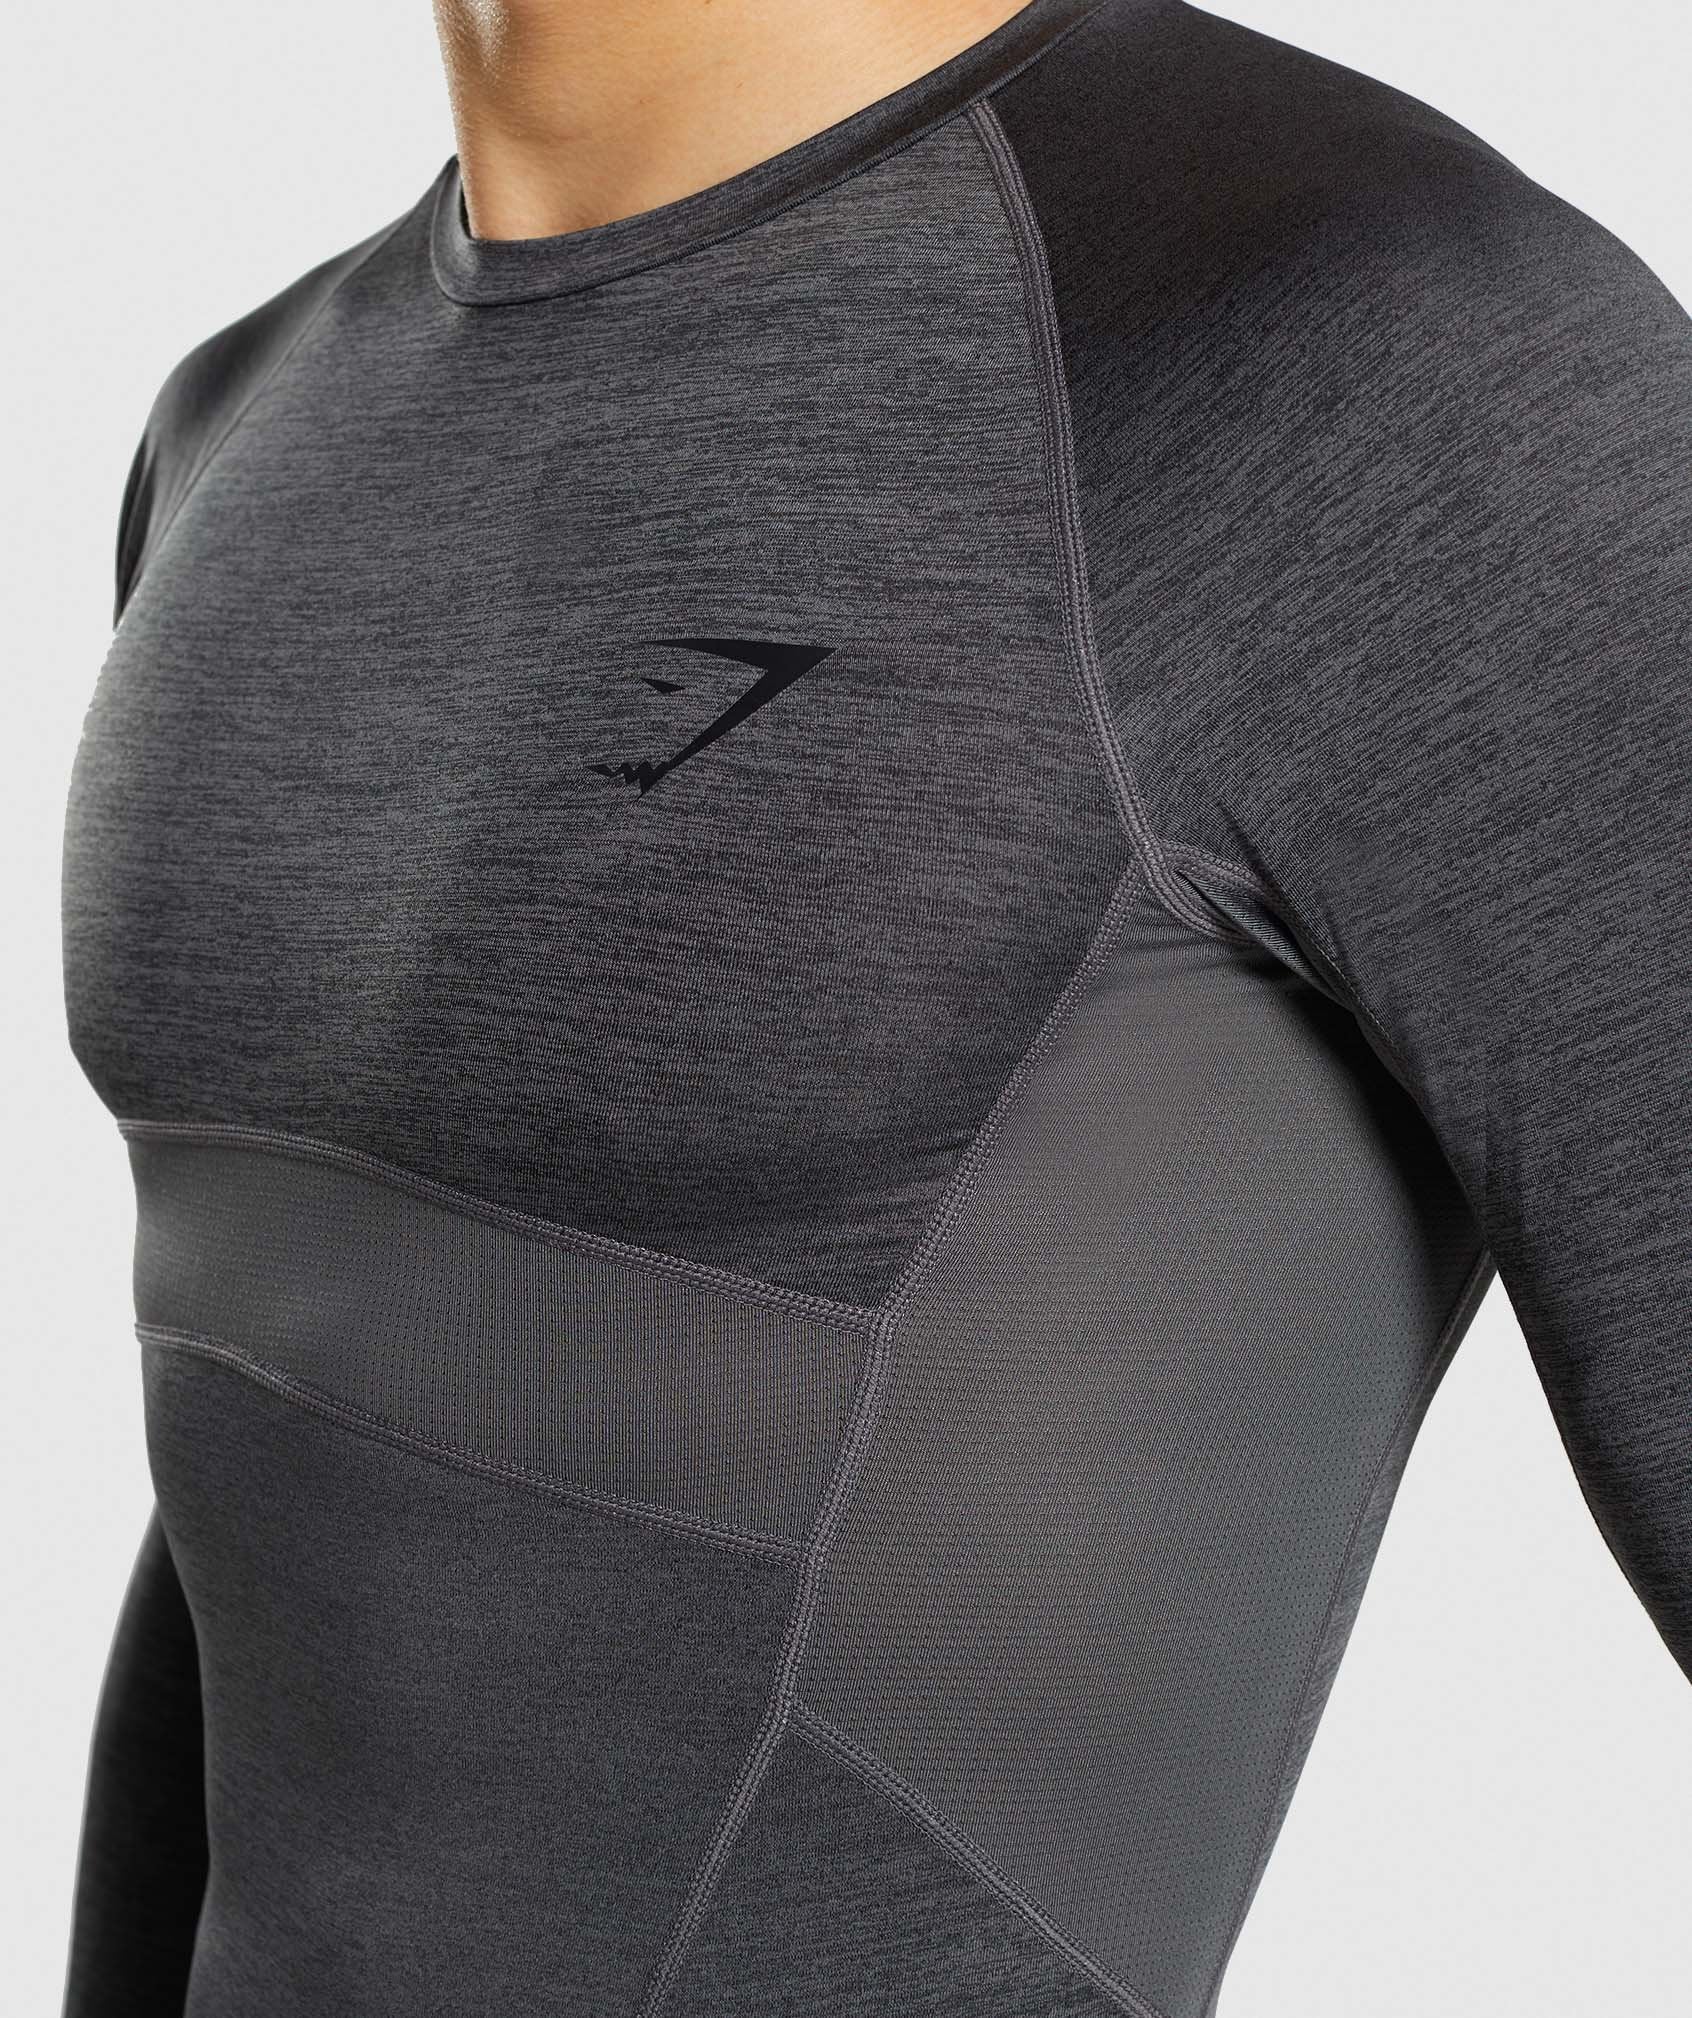 Element+ Baselayer Long Sleeve Top in Black Marl - view 5